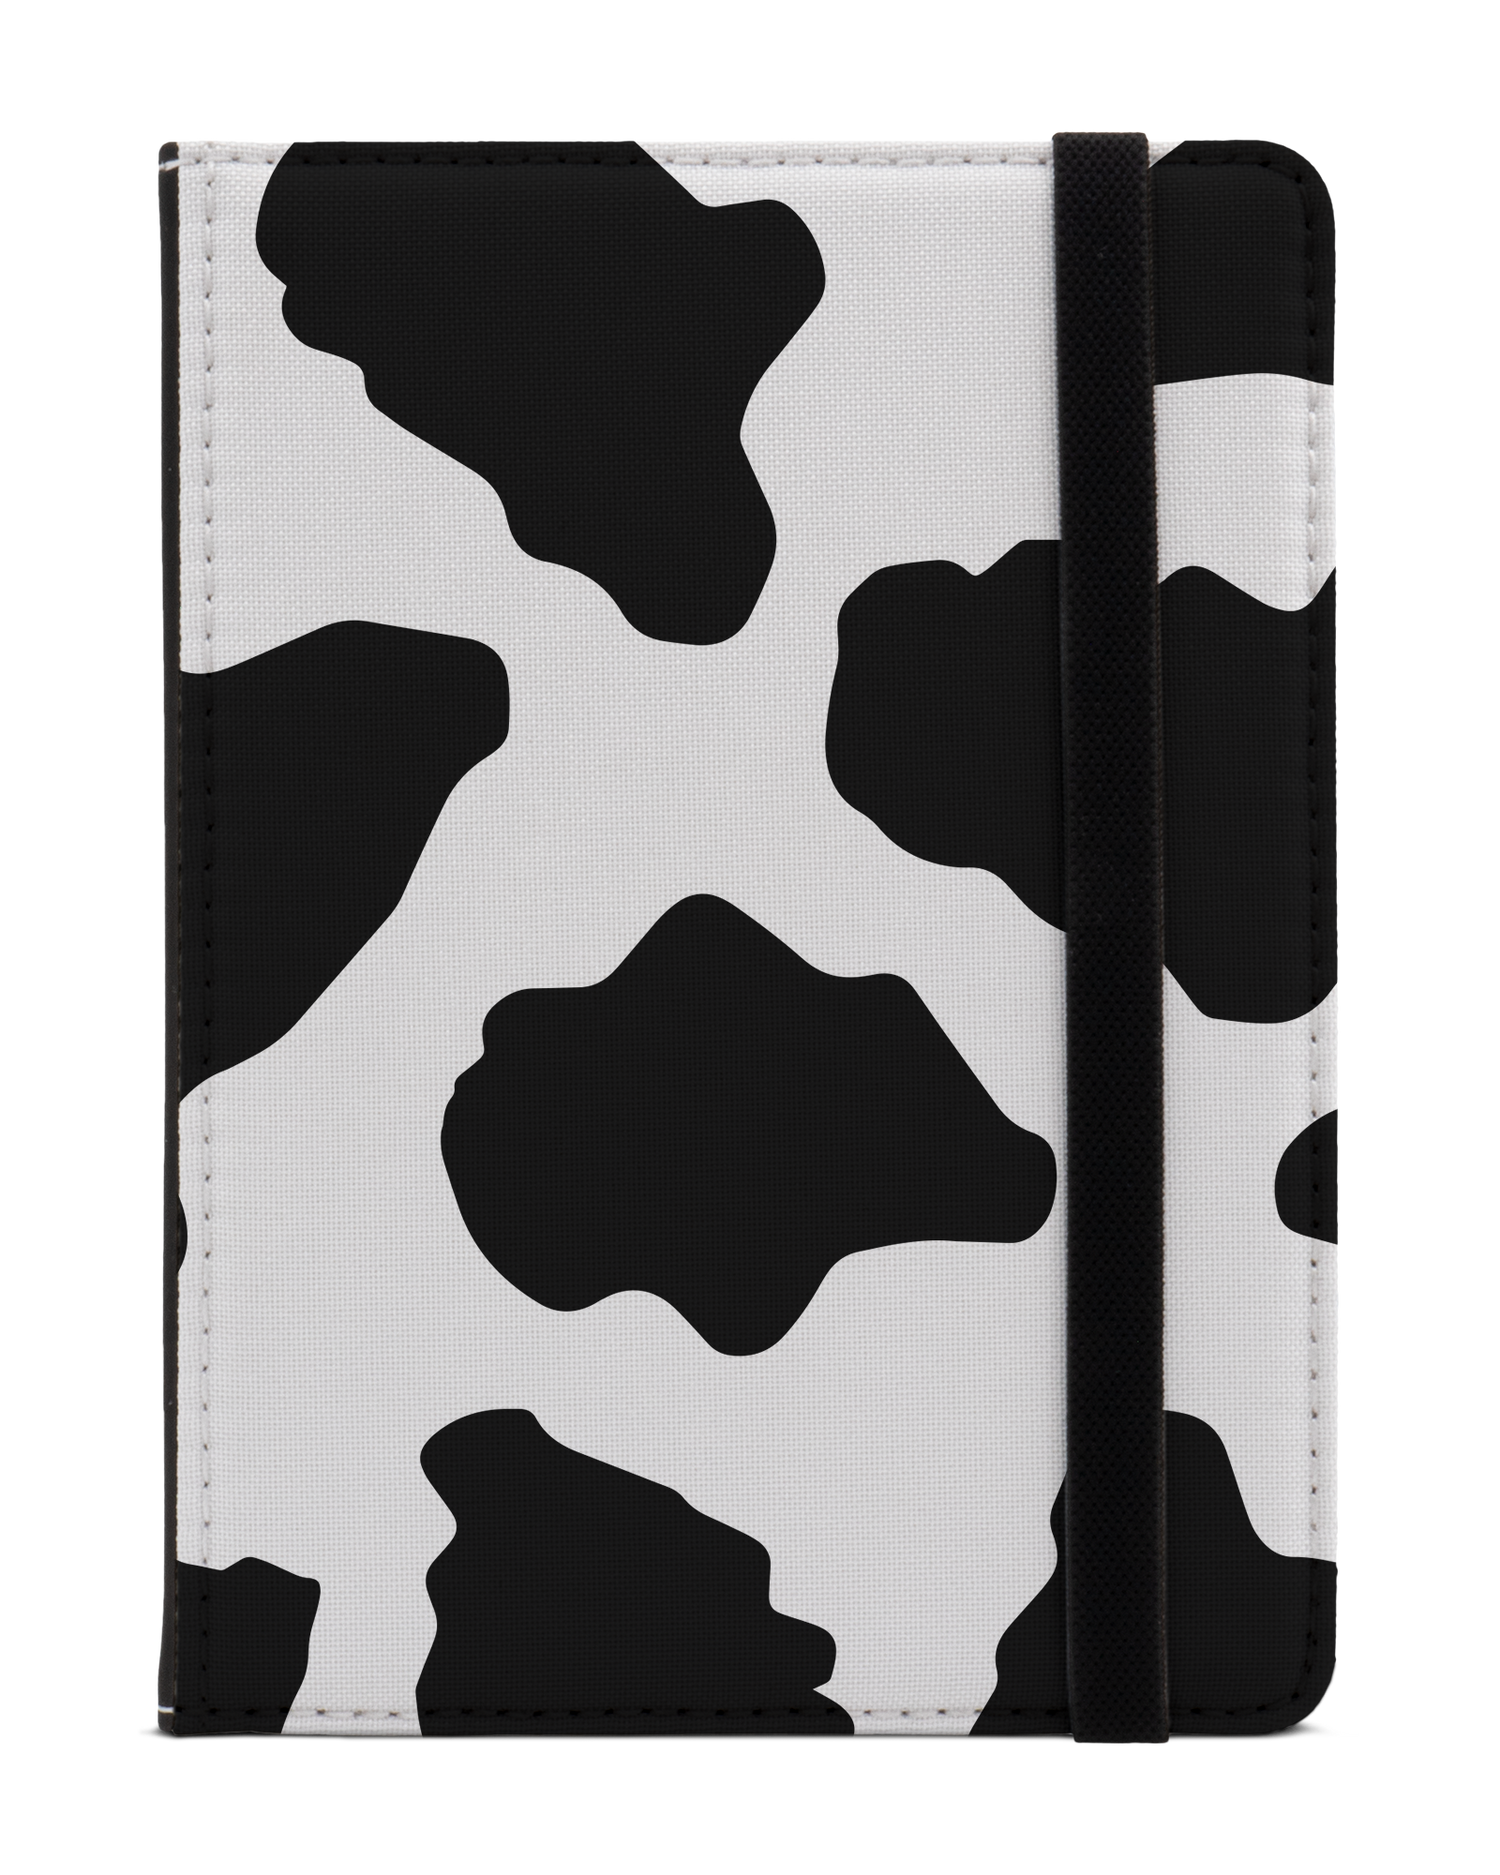 Cow Print 2 eBook Reader Hülle XS: Frontansicht